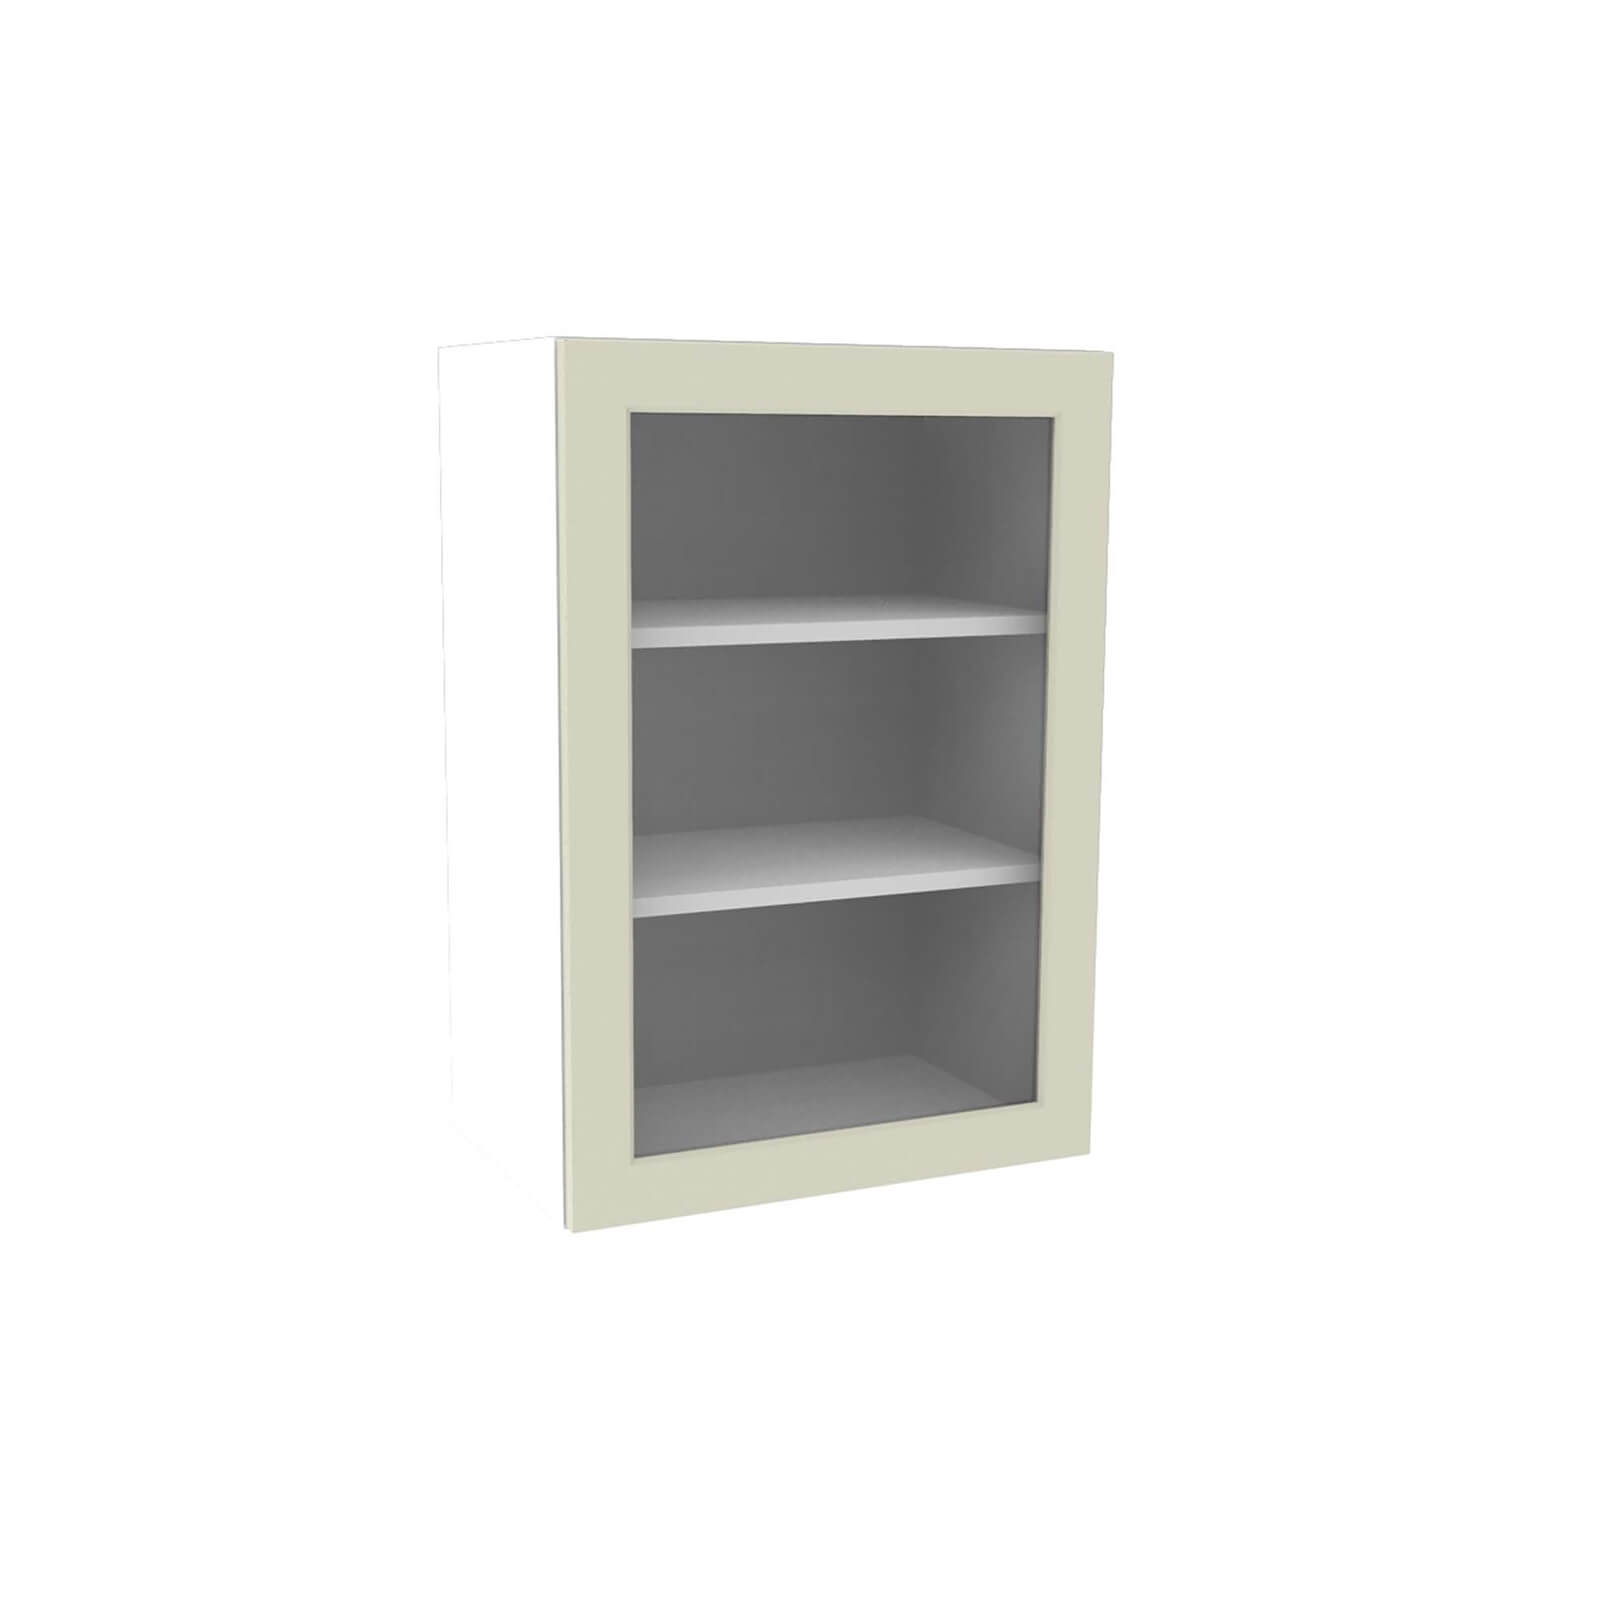 Country Shaker Cream 500mm Glass Wall Unit